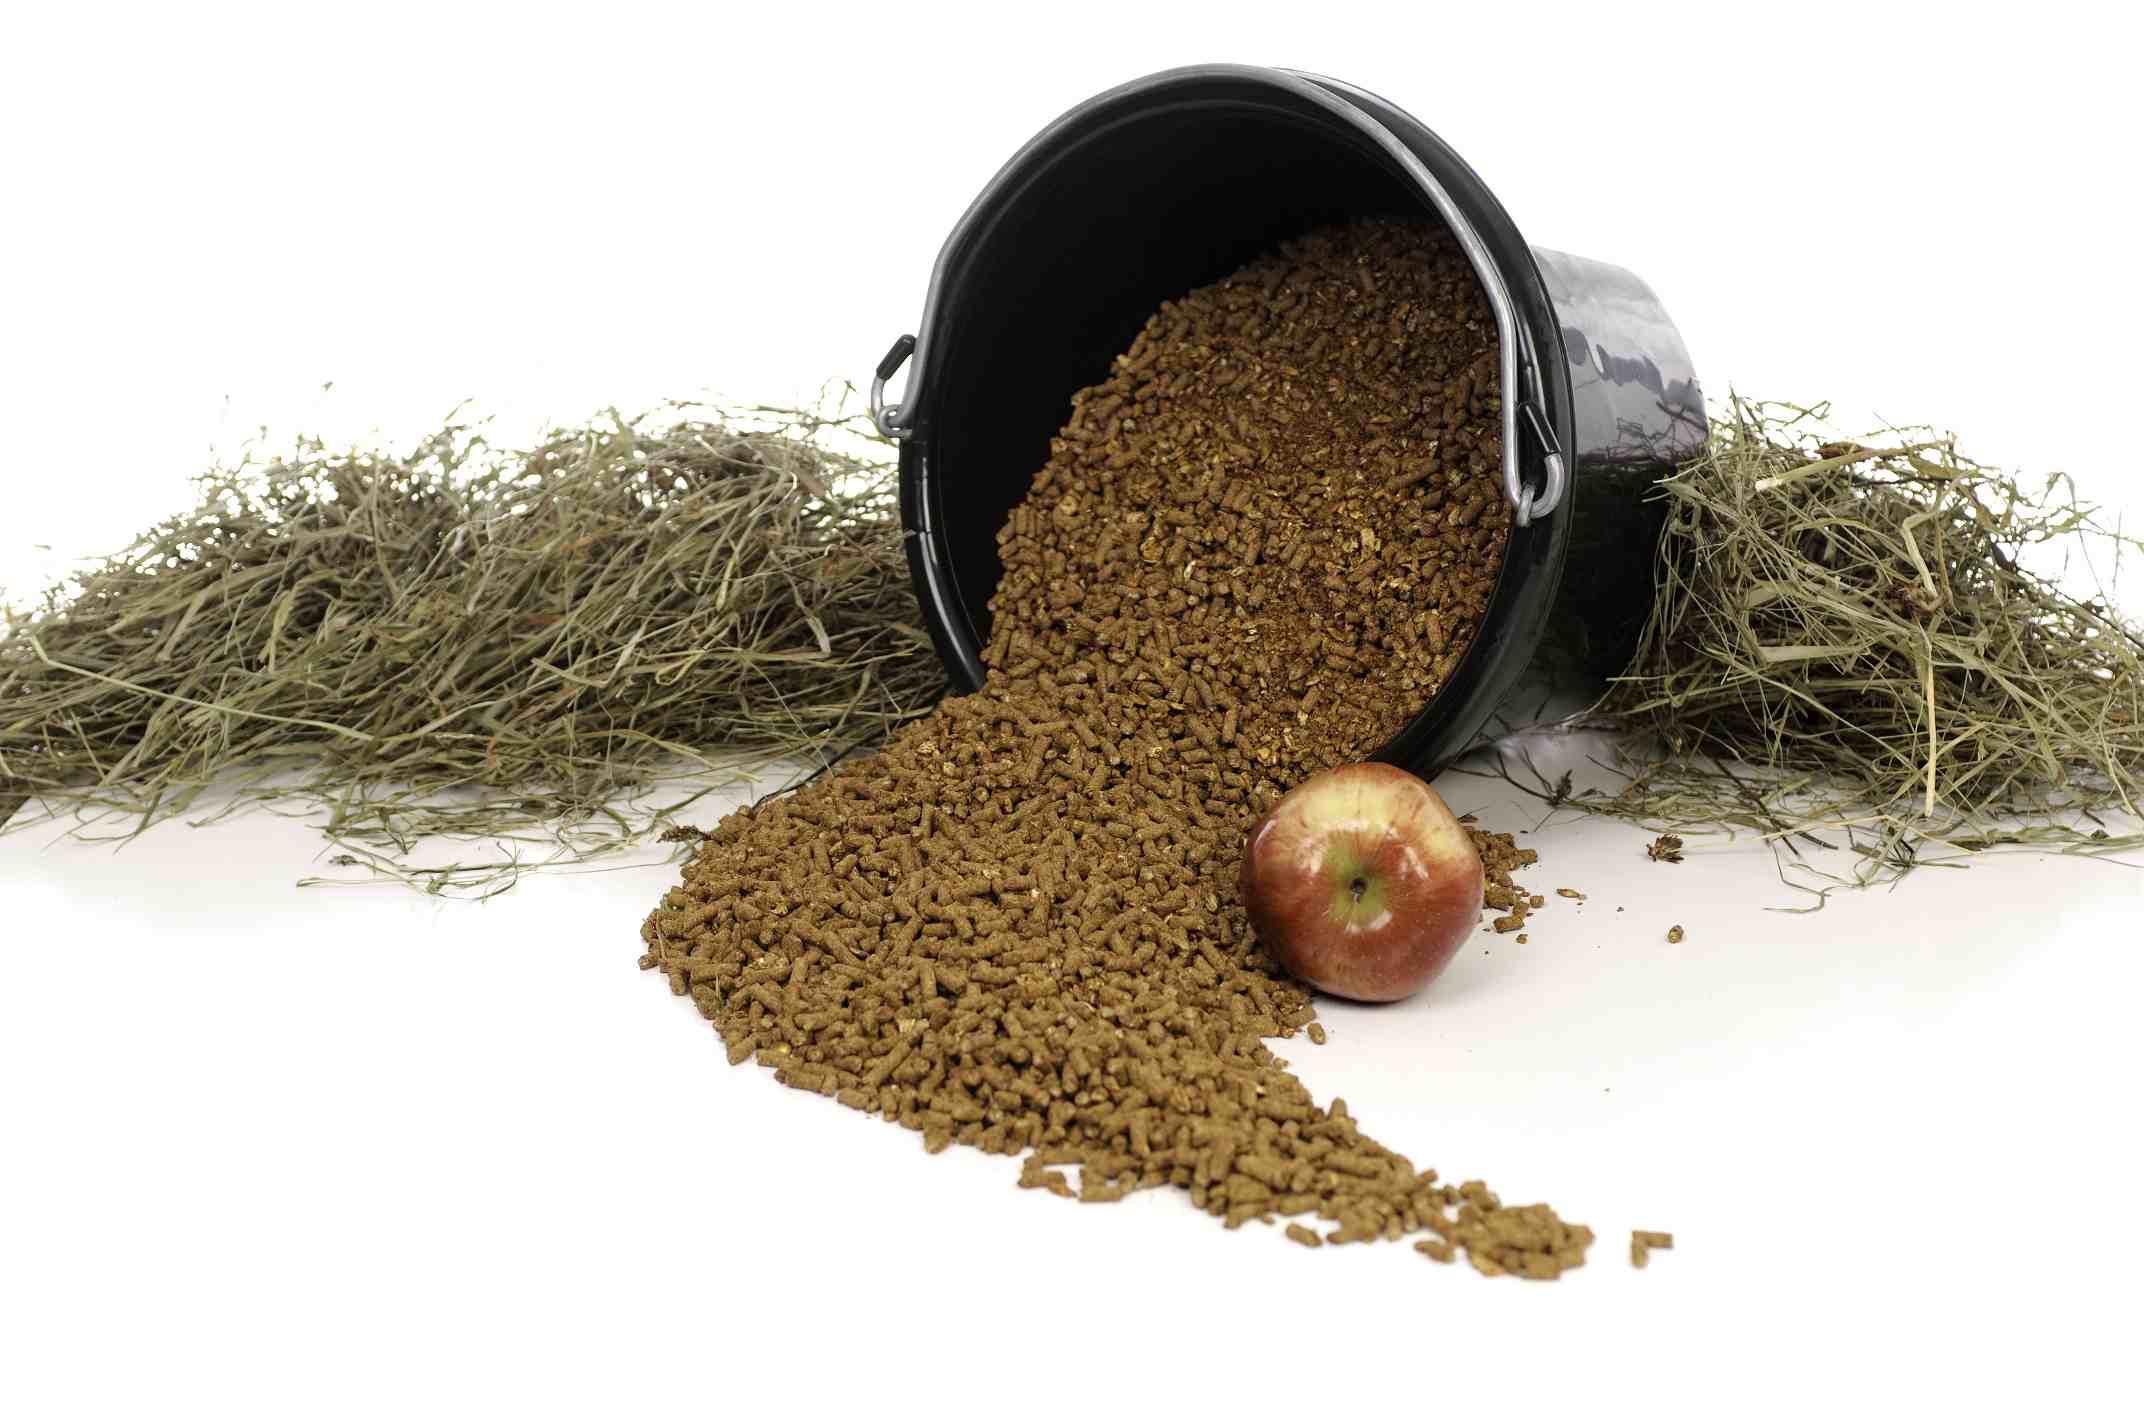 Grain spilling out of a black bucket near a pile of hay and one apple.